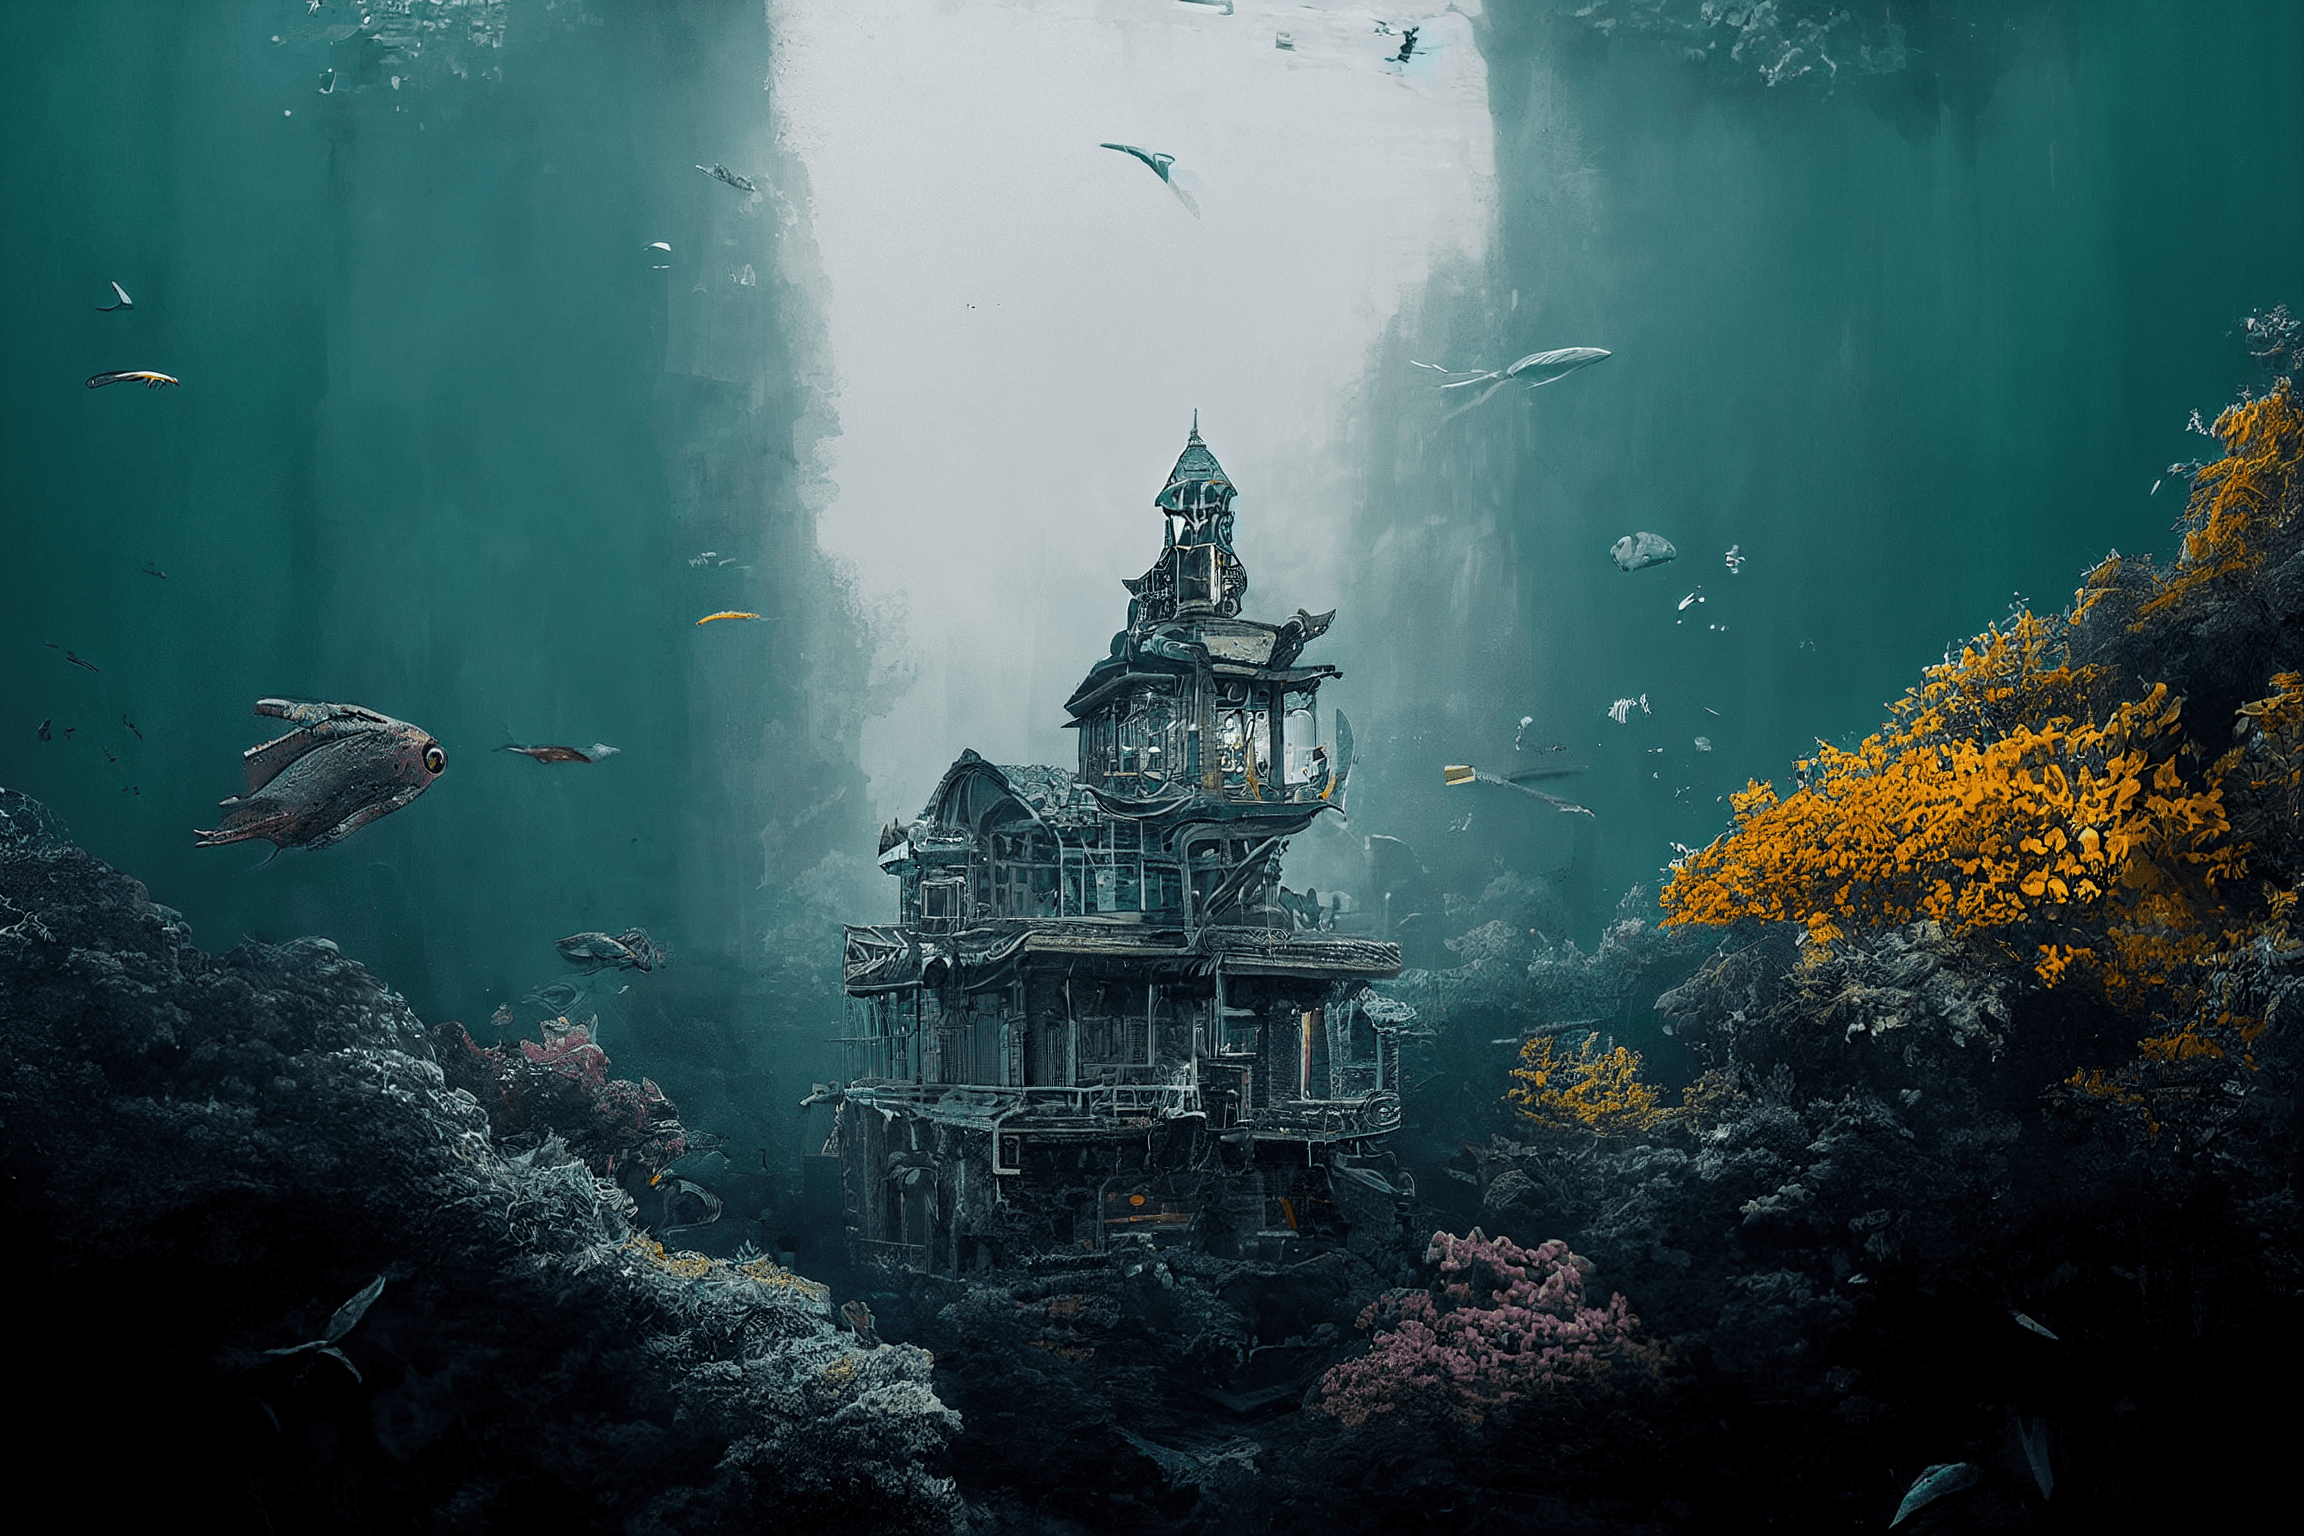 I strive just to say I’m alright – Aquapunk underwater house with fish